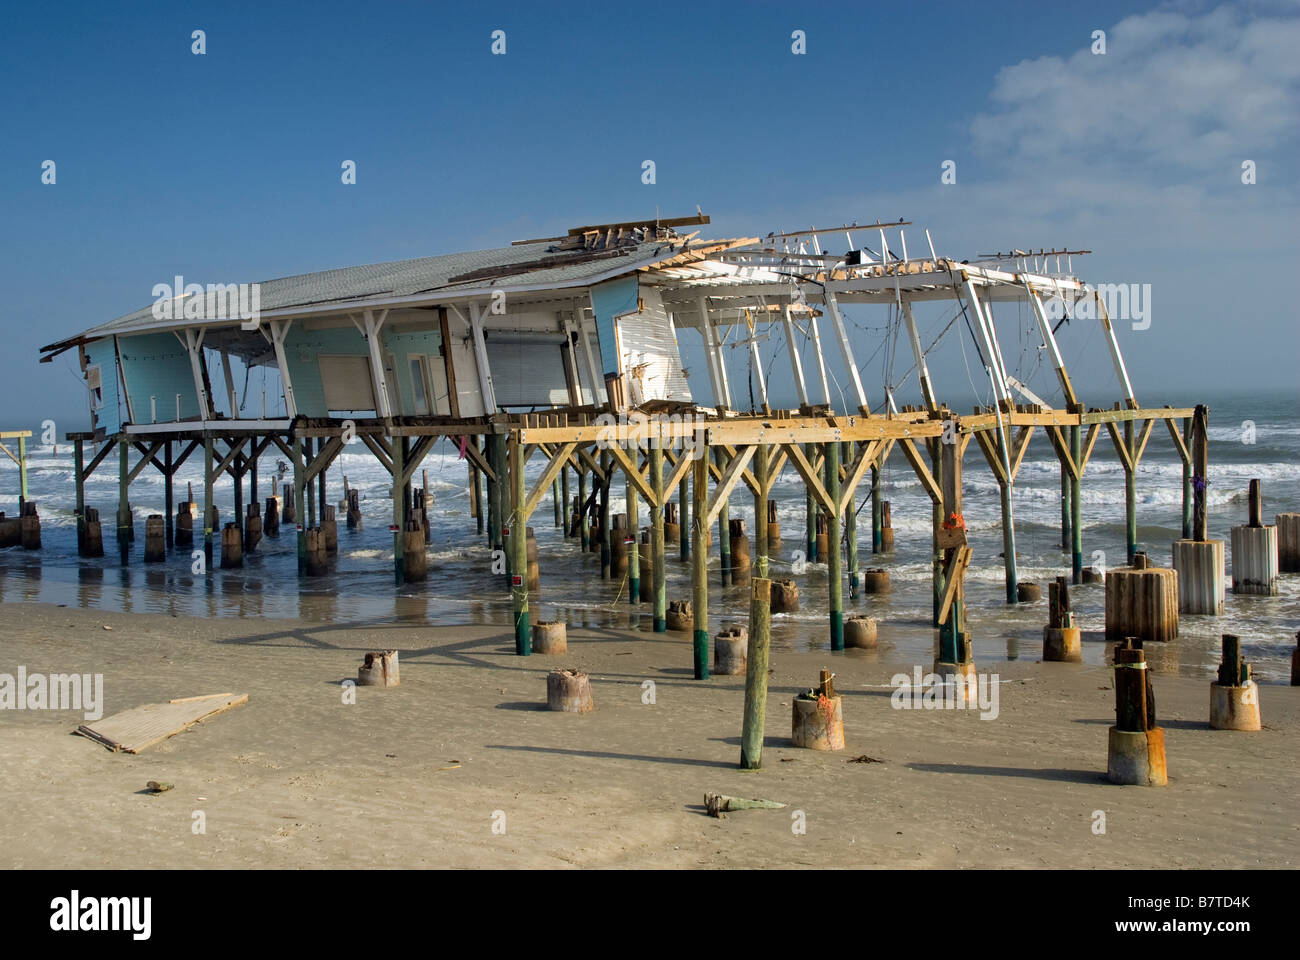 Remains of souvenir shop destroyed by Hurricane Ike in 2008 on beach at Seawall Boulevard in Galveston Texas USA Stock Photo